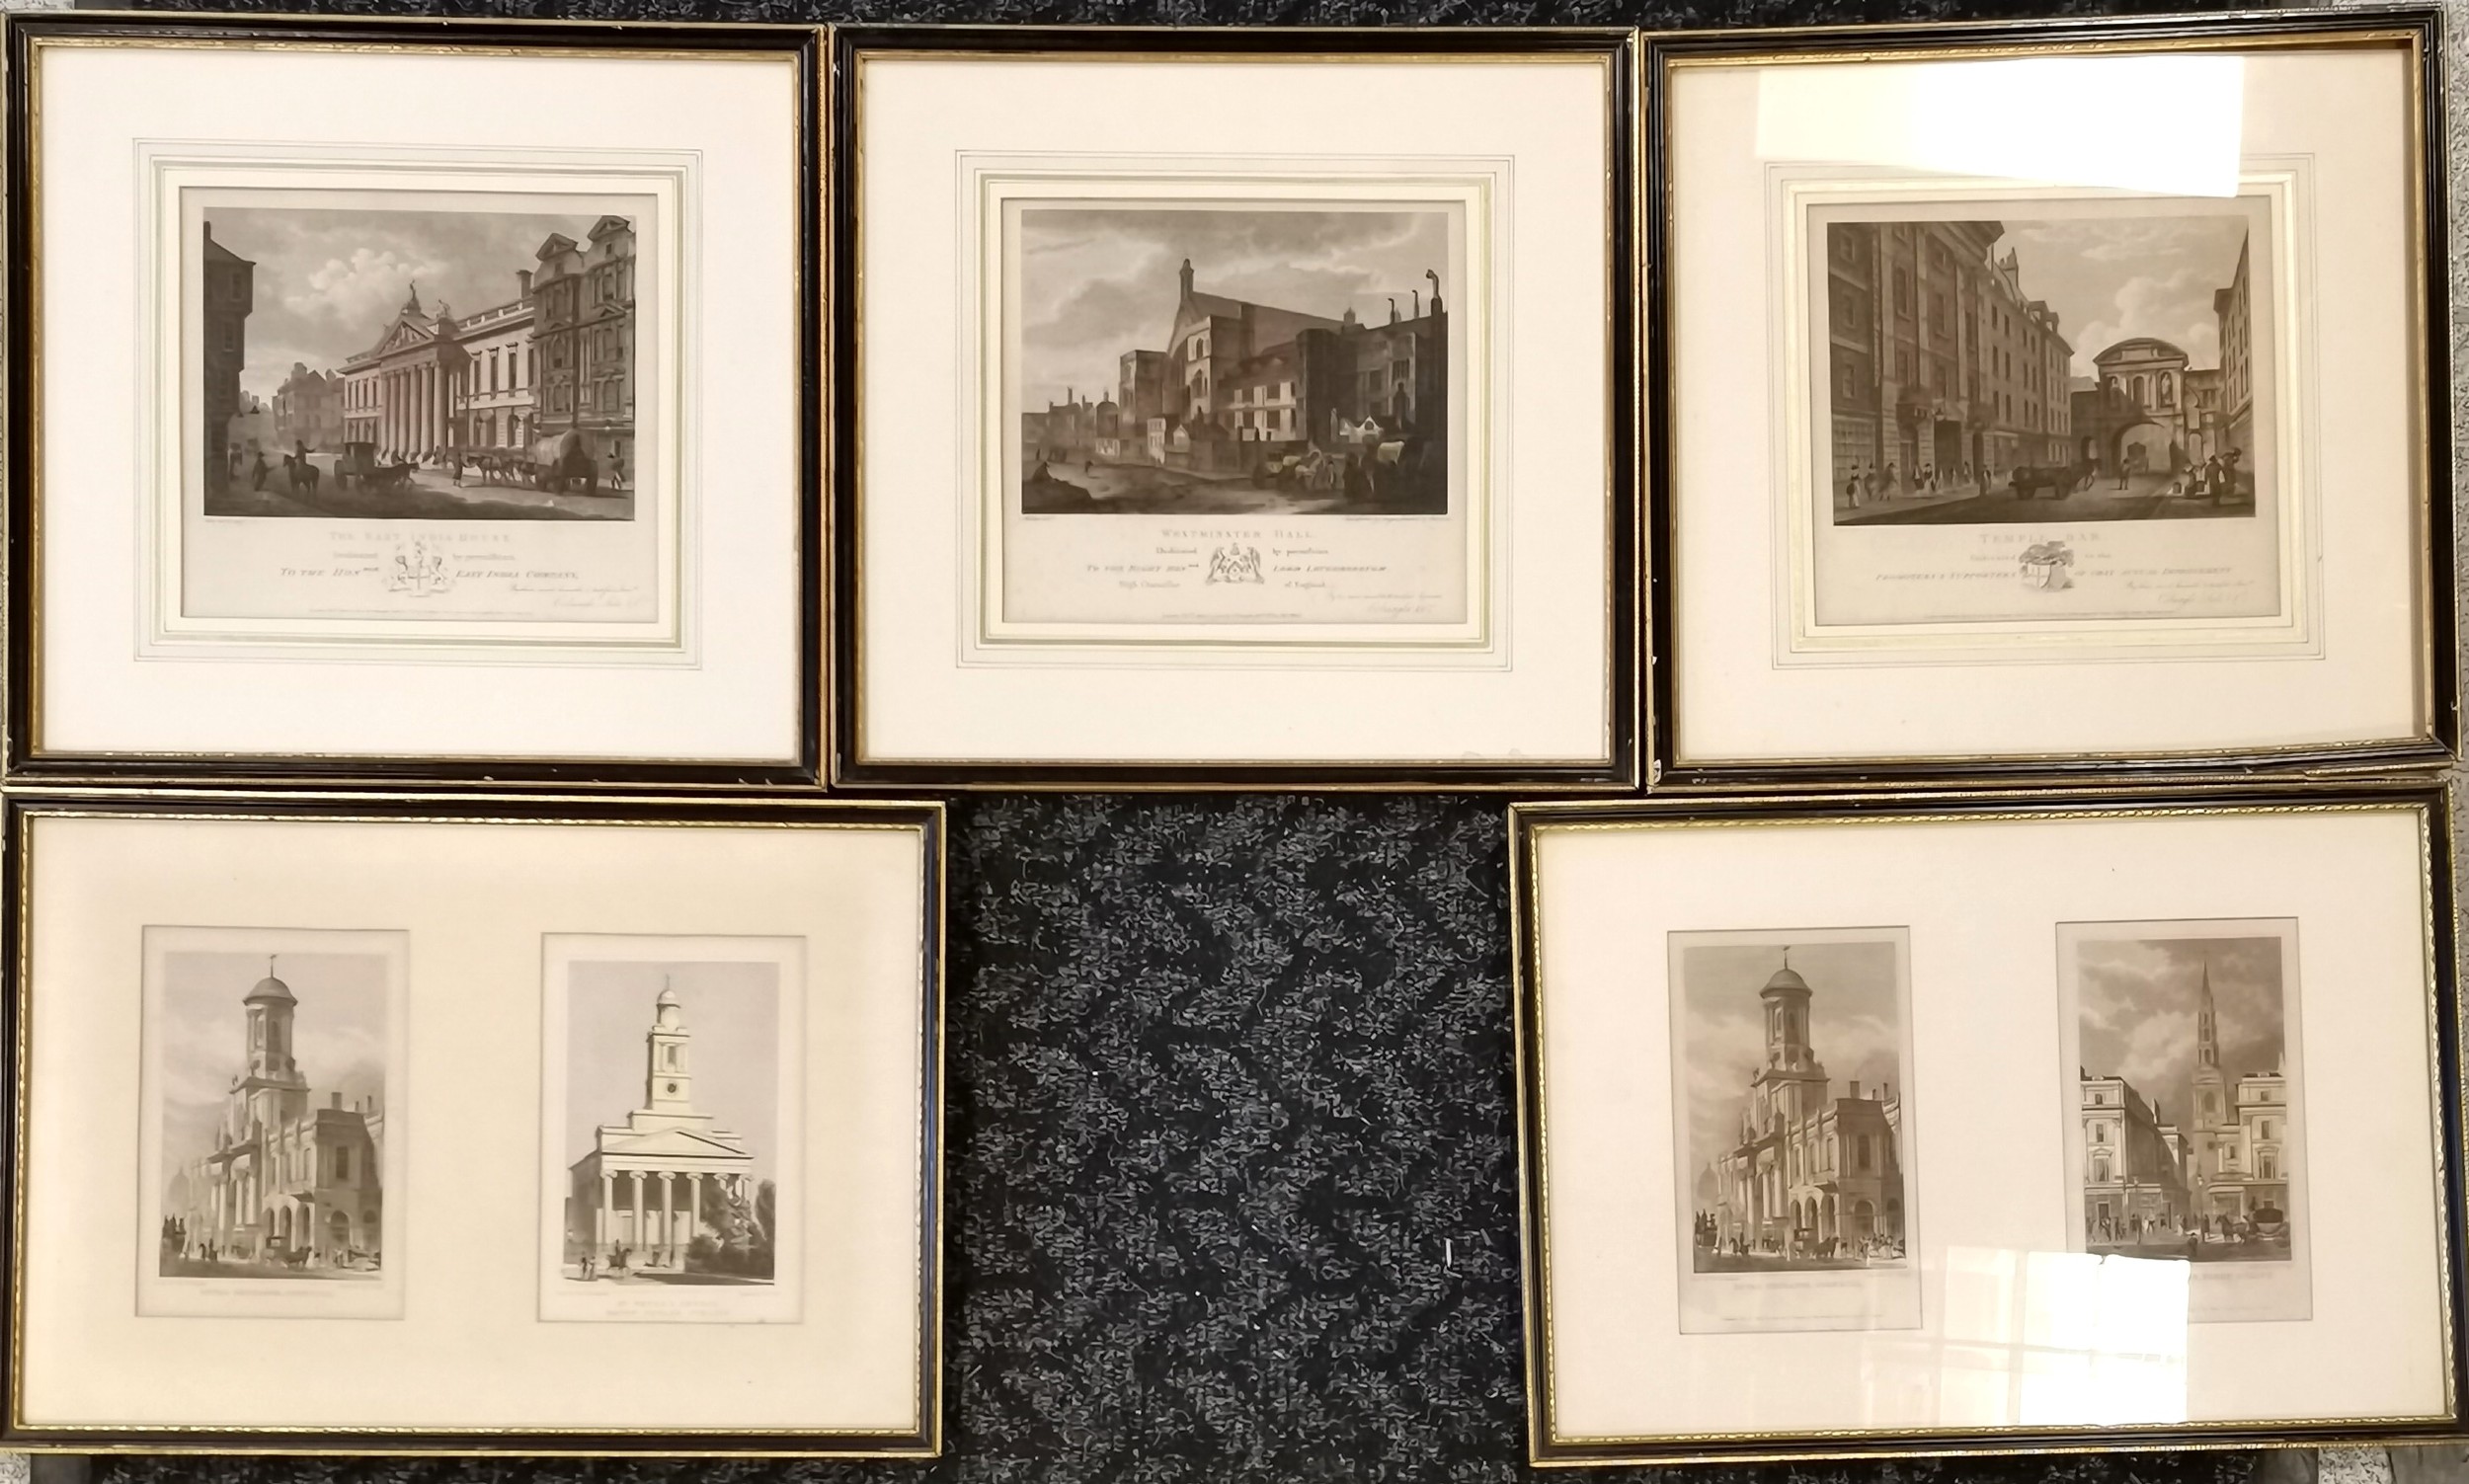 Set of 3 framed engravings of Architectural scenes to include Westminster Hall, Temple Bar & The